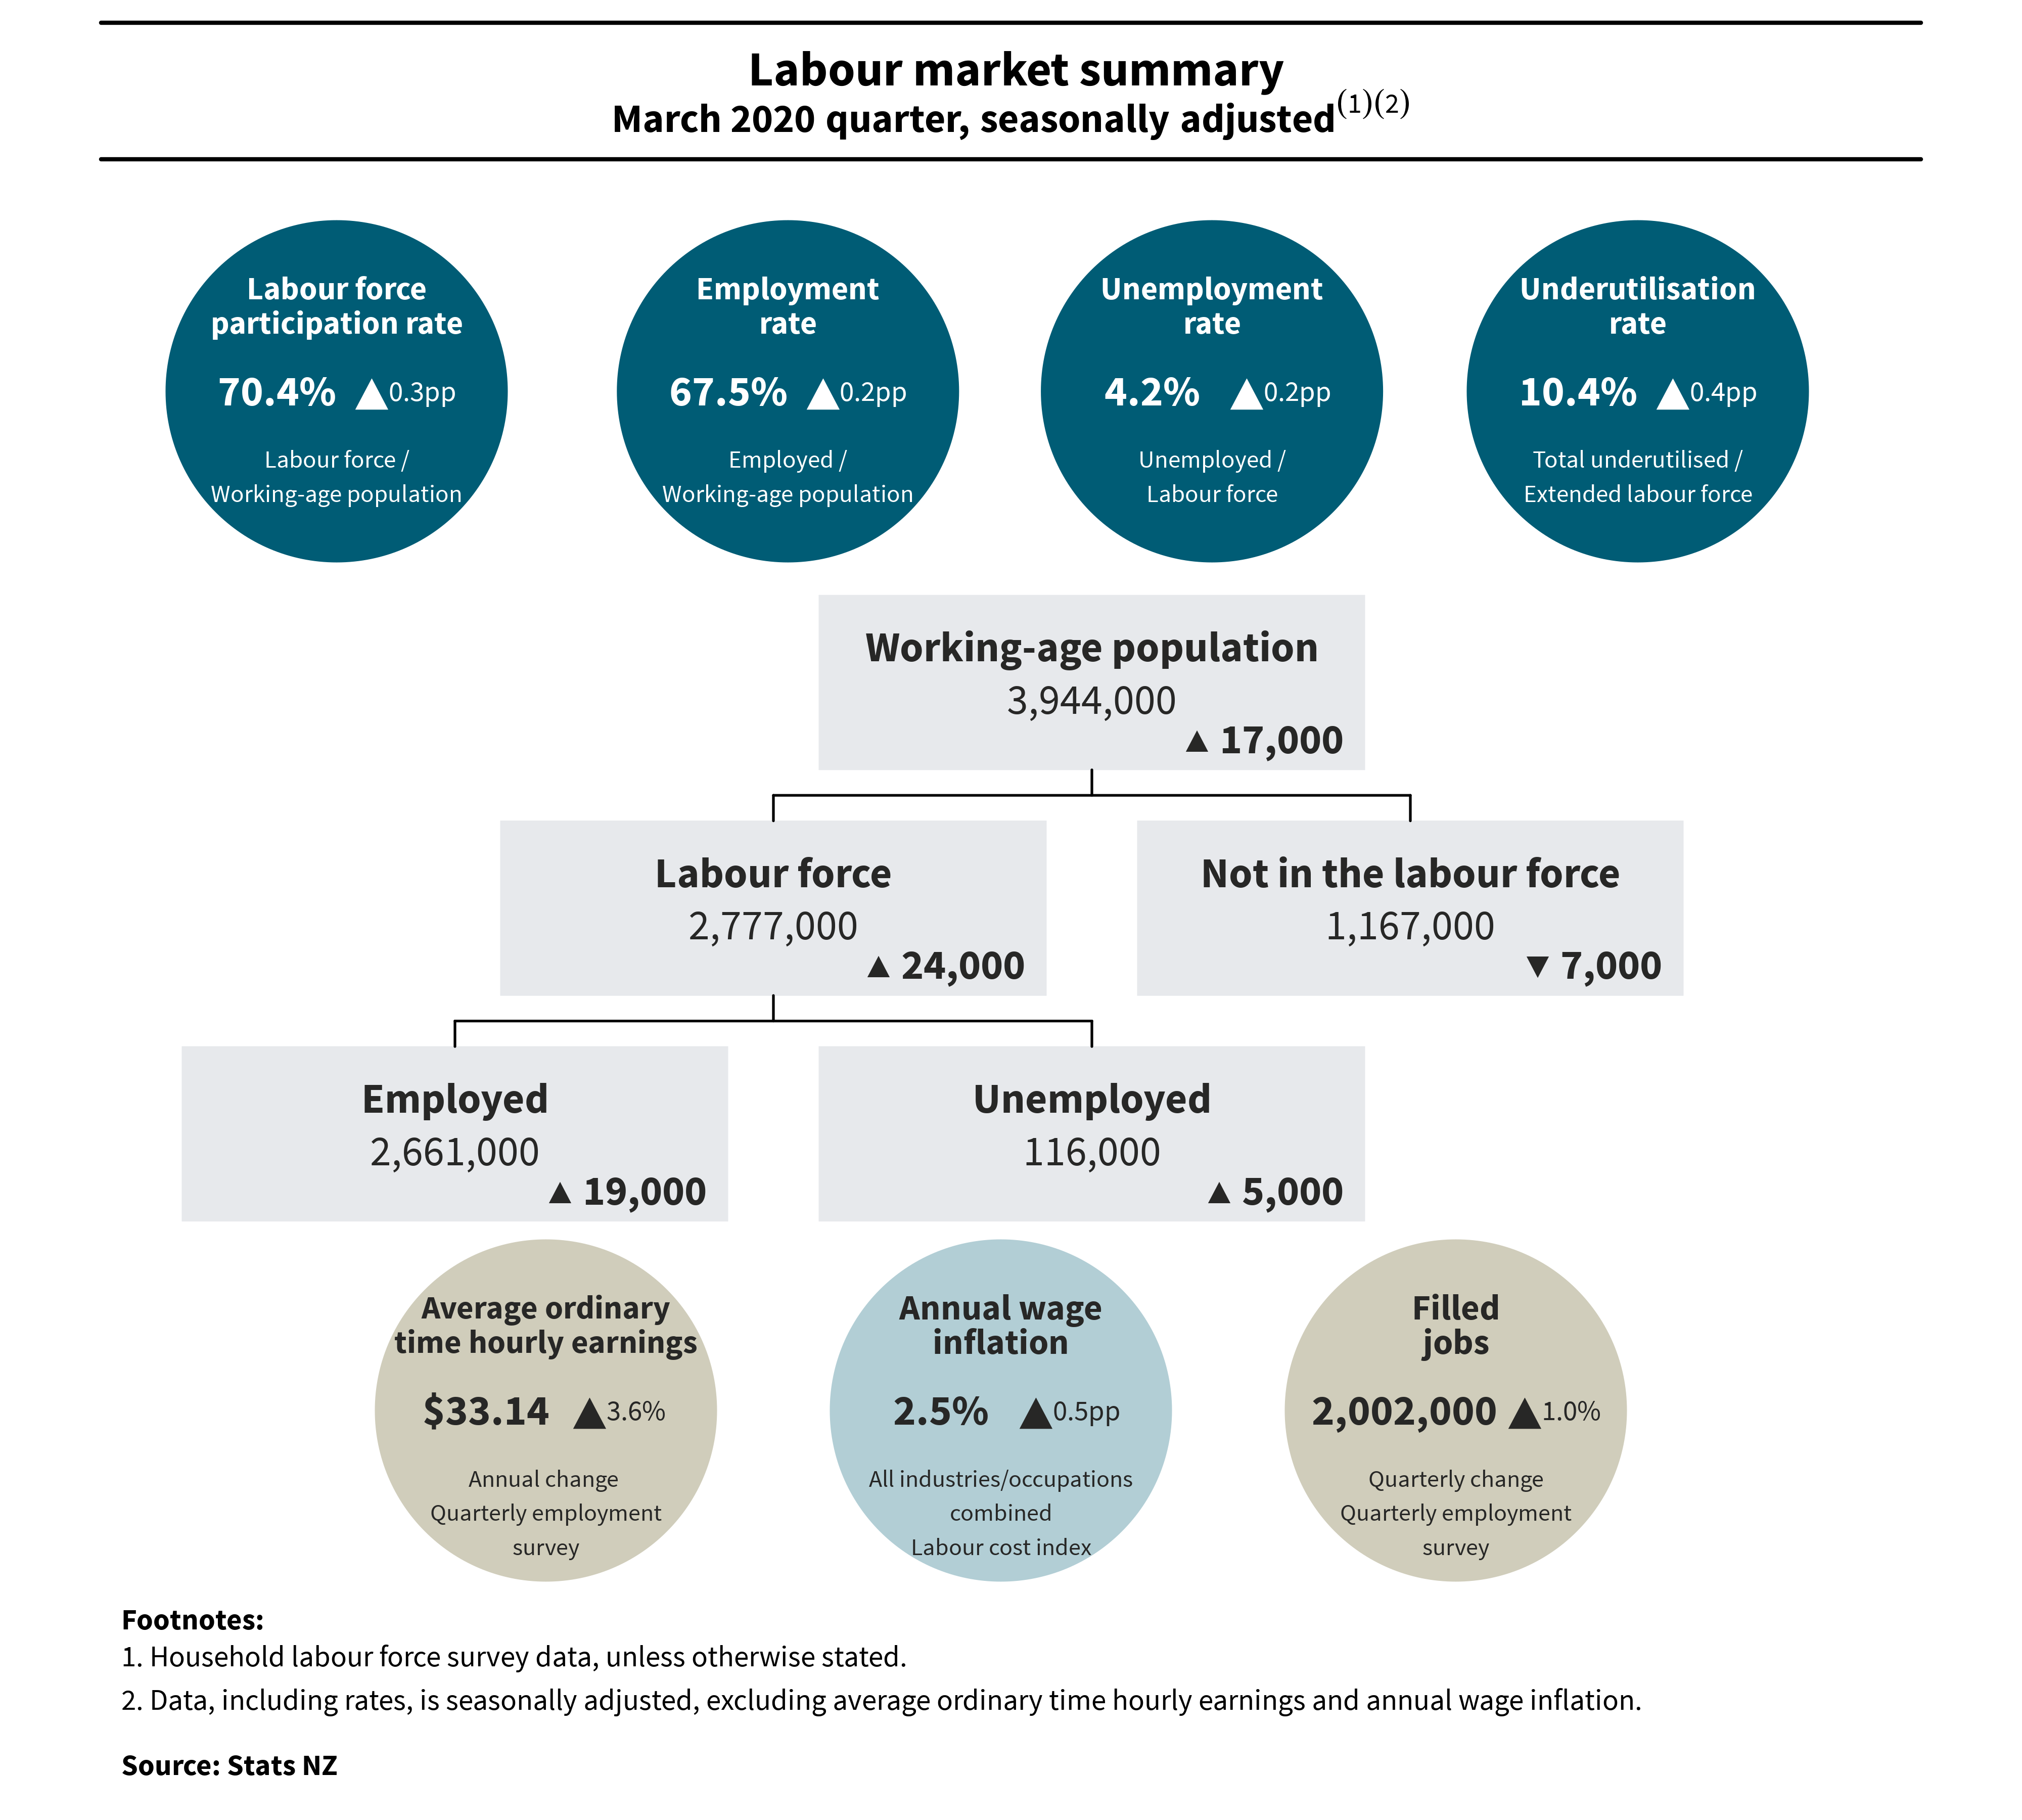 Diagram showing labour market summary, March 2020 quarter, seasonally adjusted. Text alternative available below diagram.